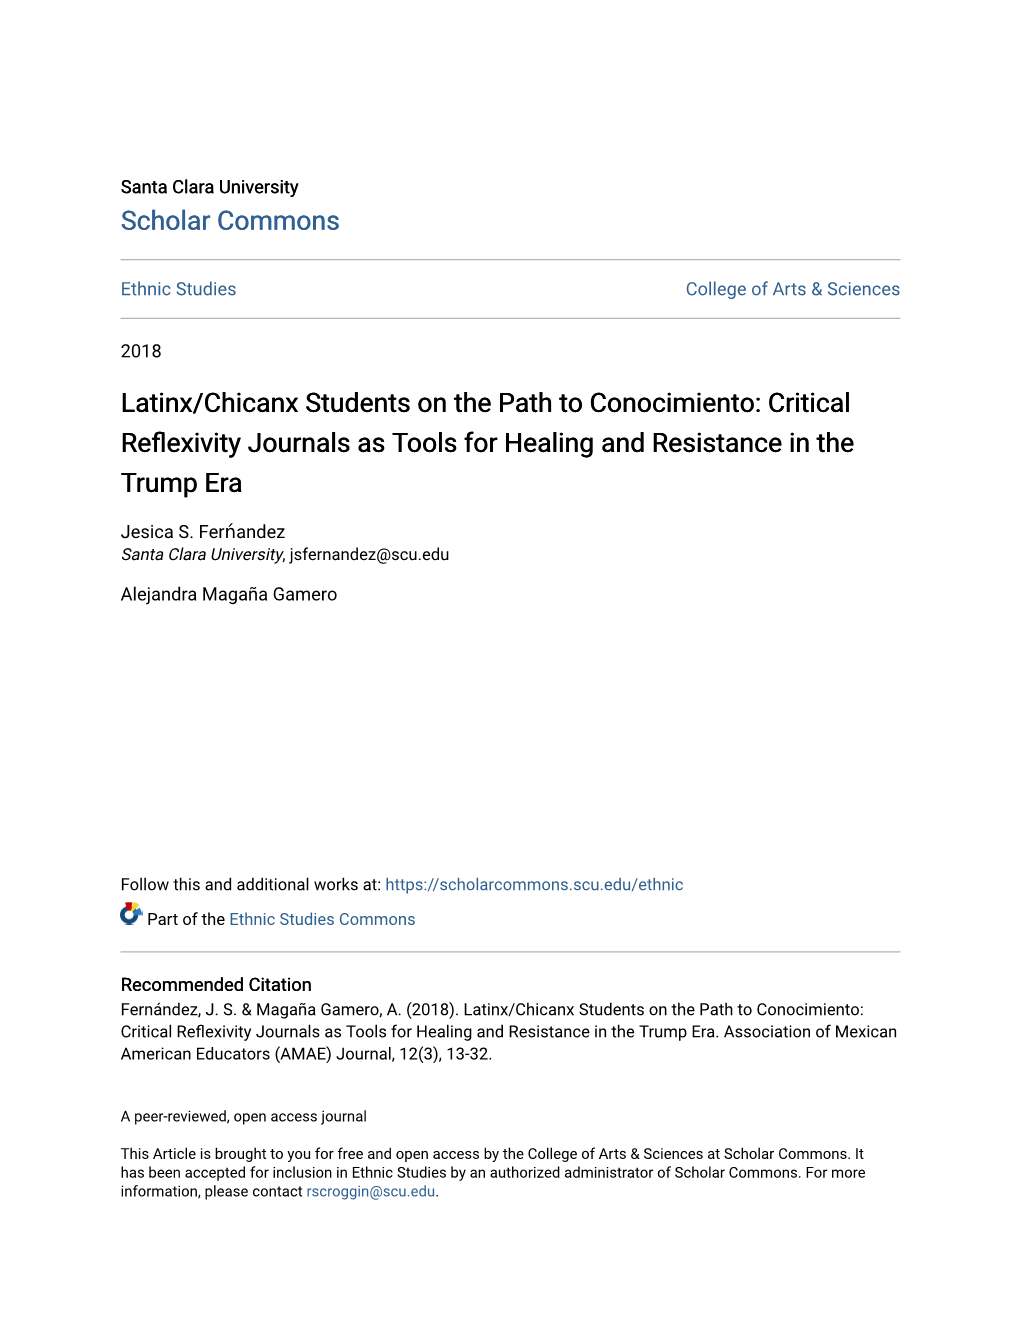 Latinx/Chicanx Students on the Path to Conocimiento: Critical Reflexivity Journals As Oolst for Healing and Resistance in the Trump Era